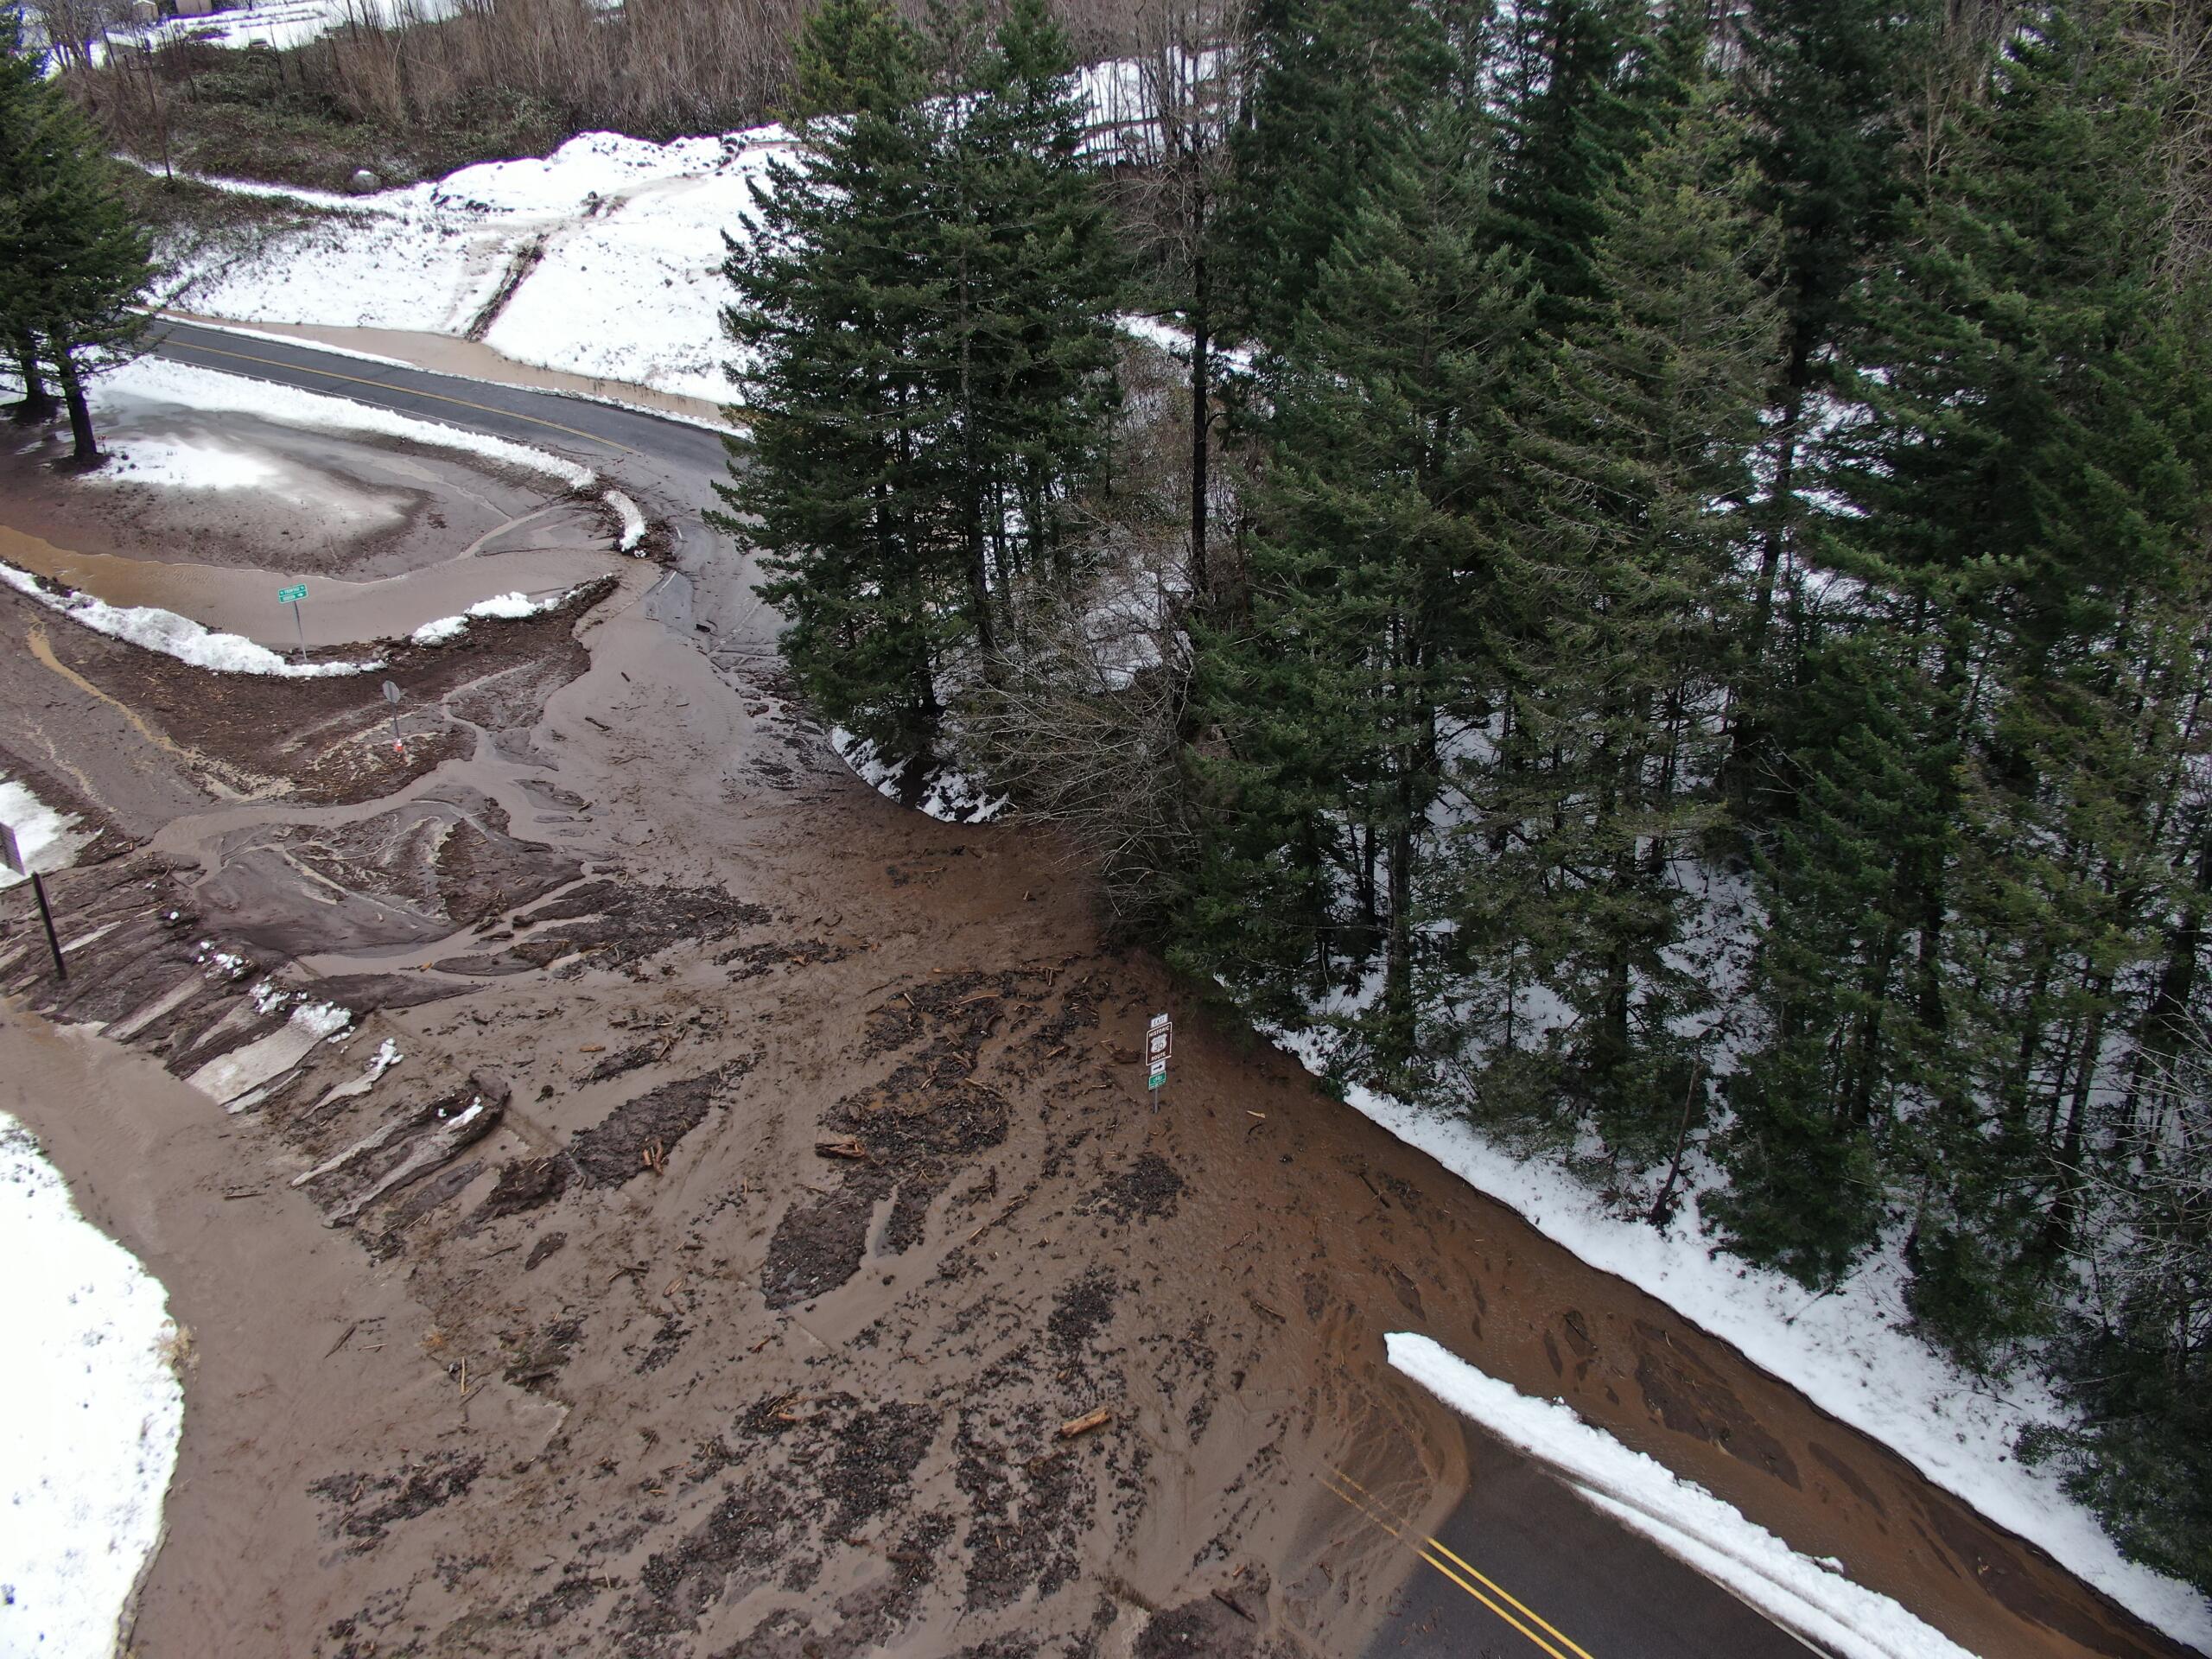 A landslide has closed Interstate 84 between Troutdate and Hood River in both directions.